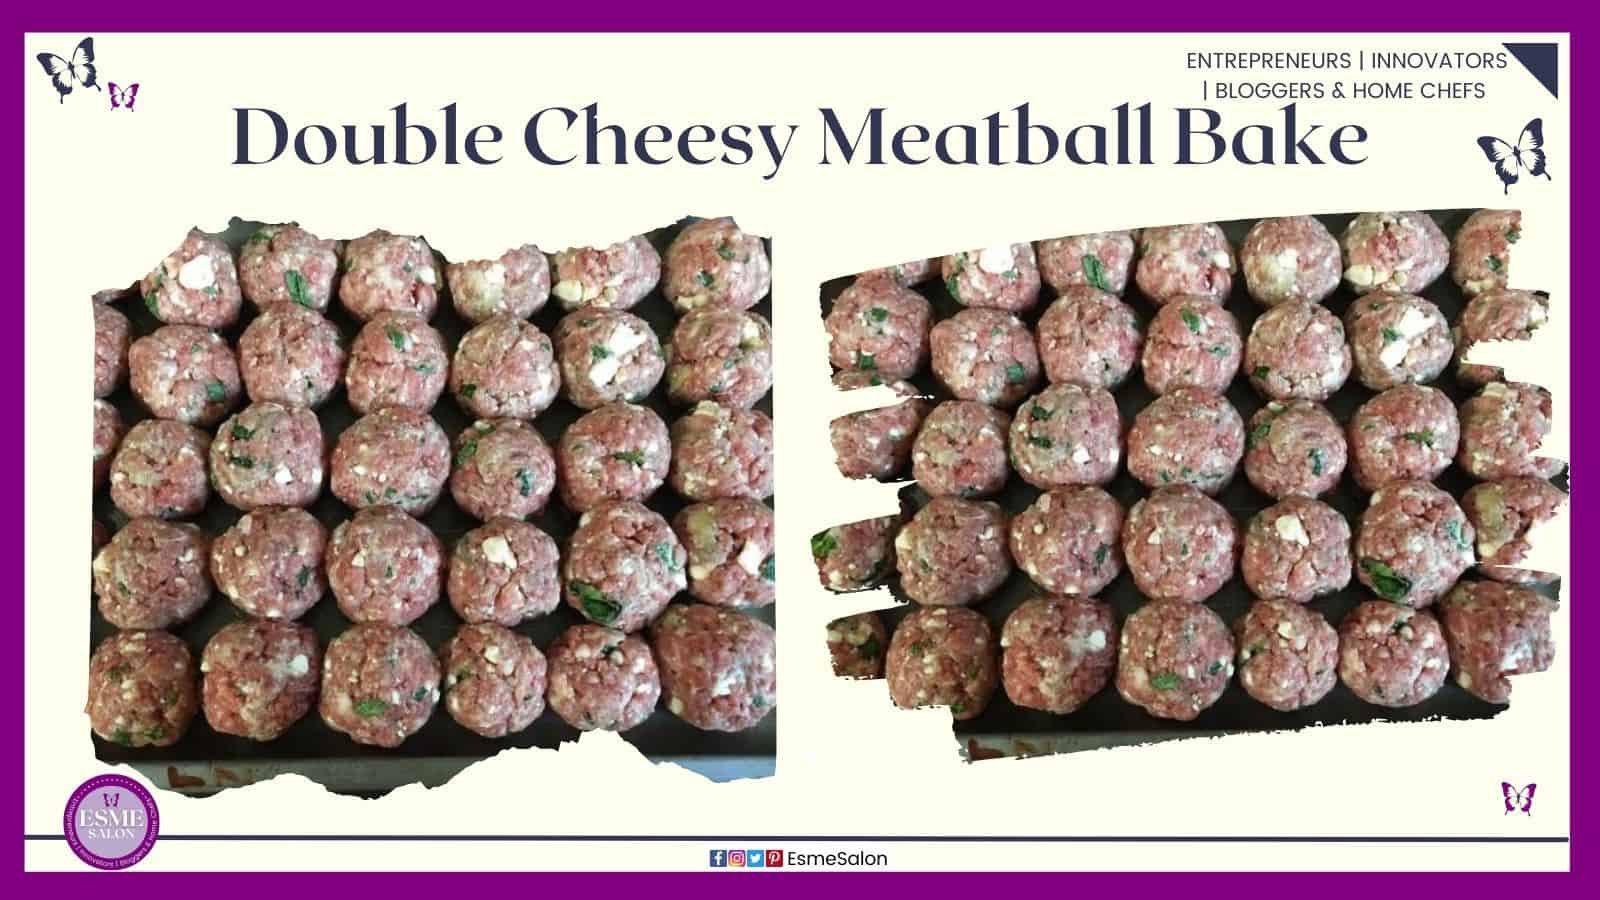 an image of a baking tray filled with raw Double Cheesy Meatballs ready for baking